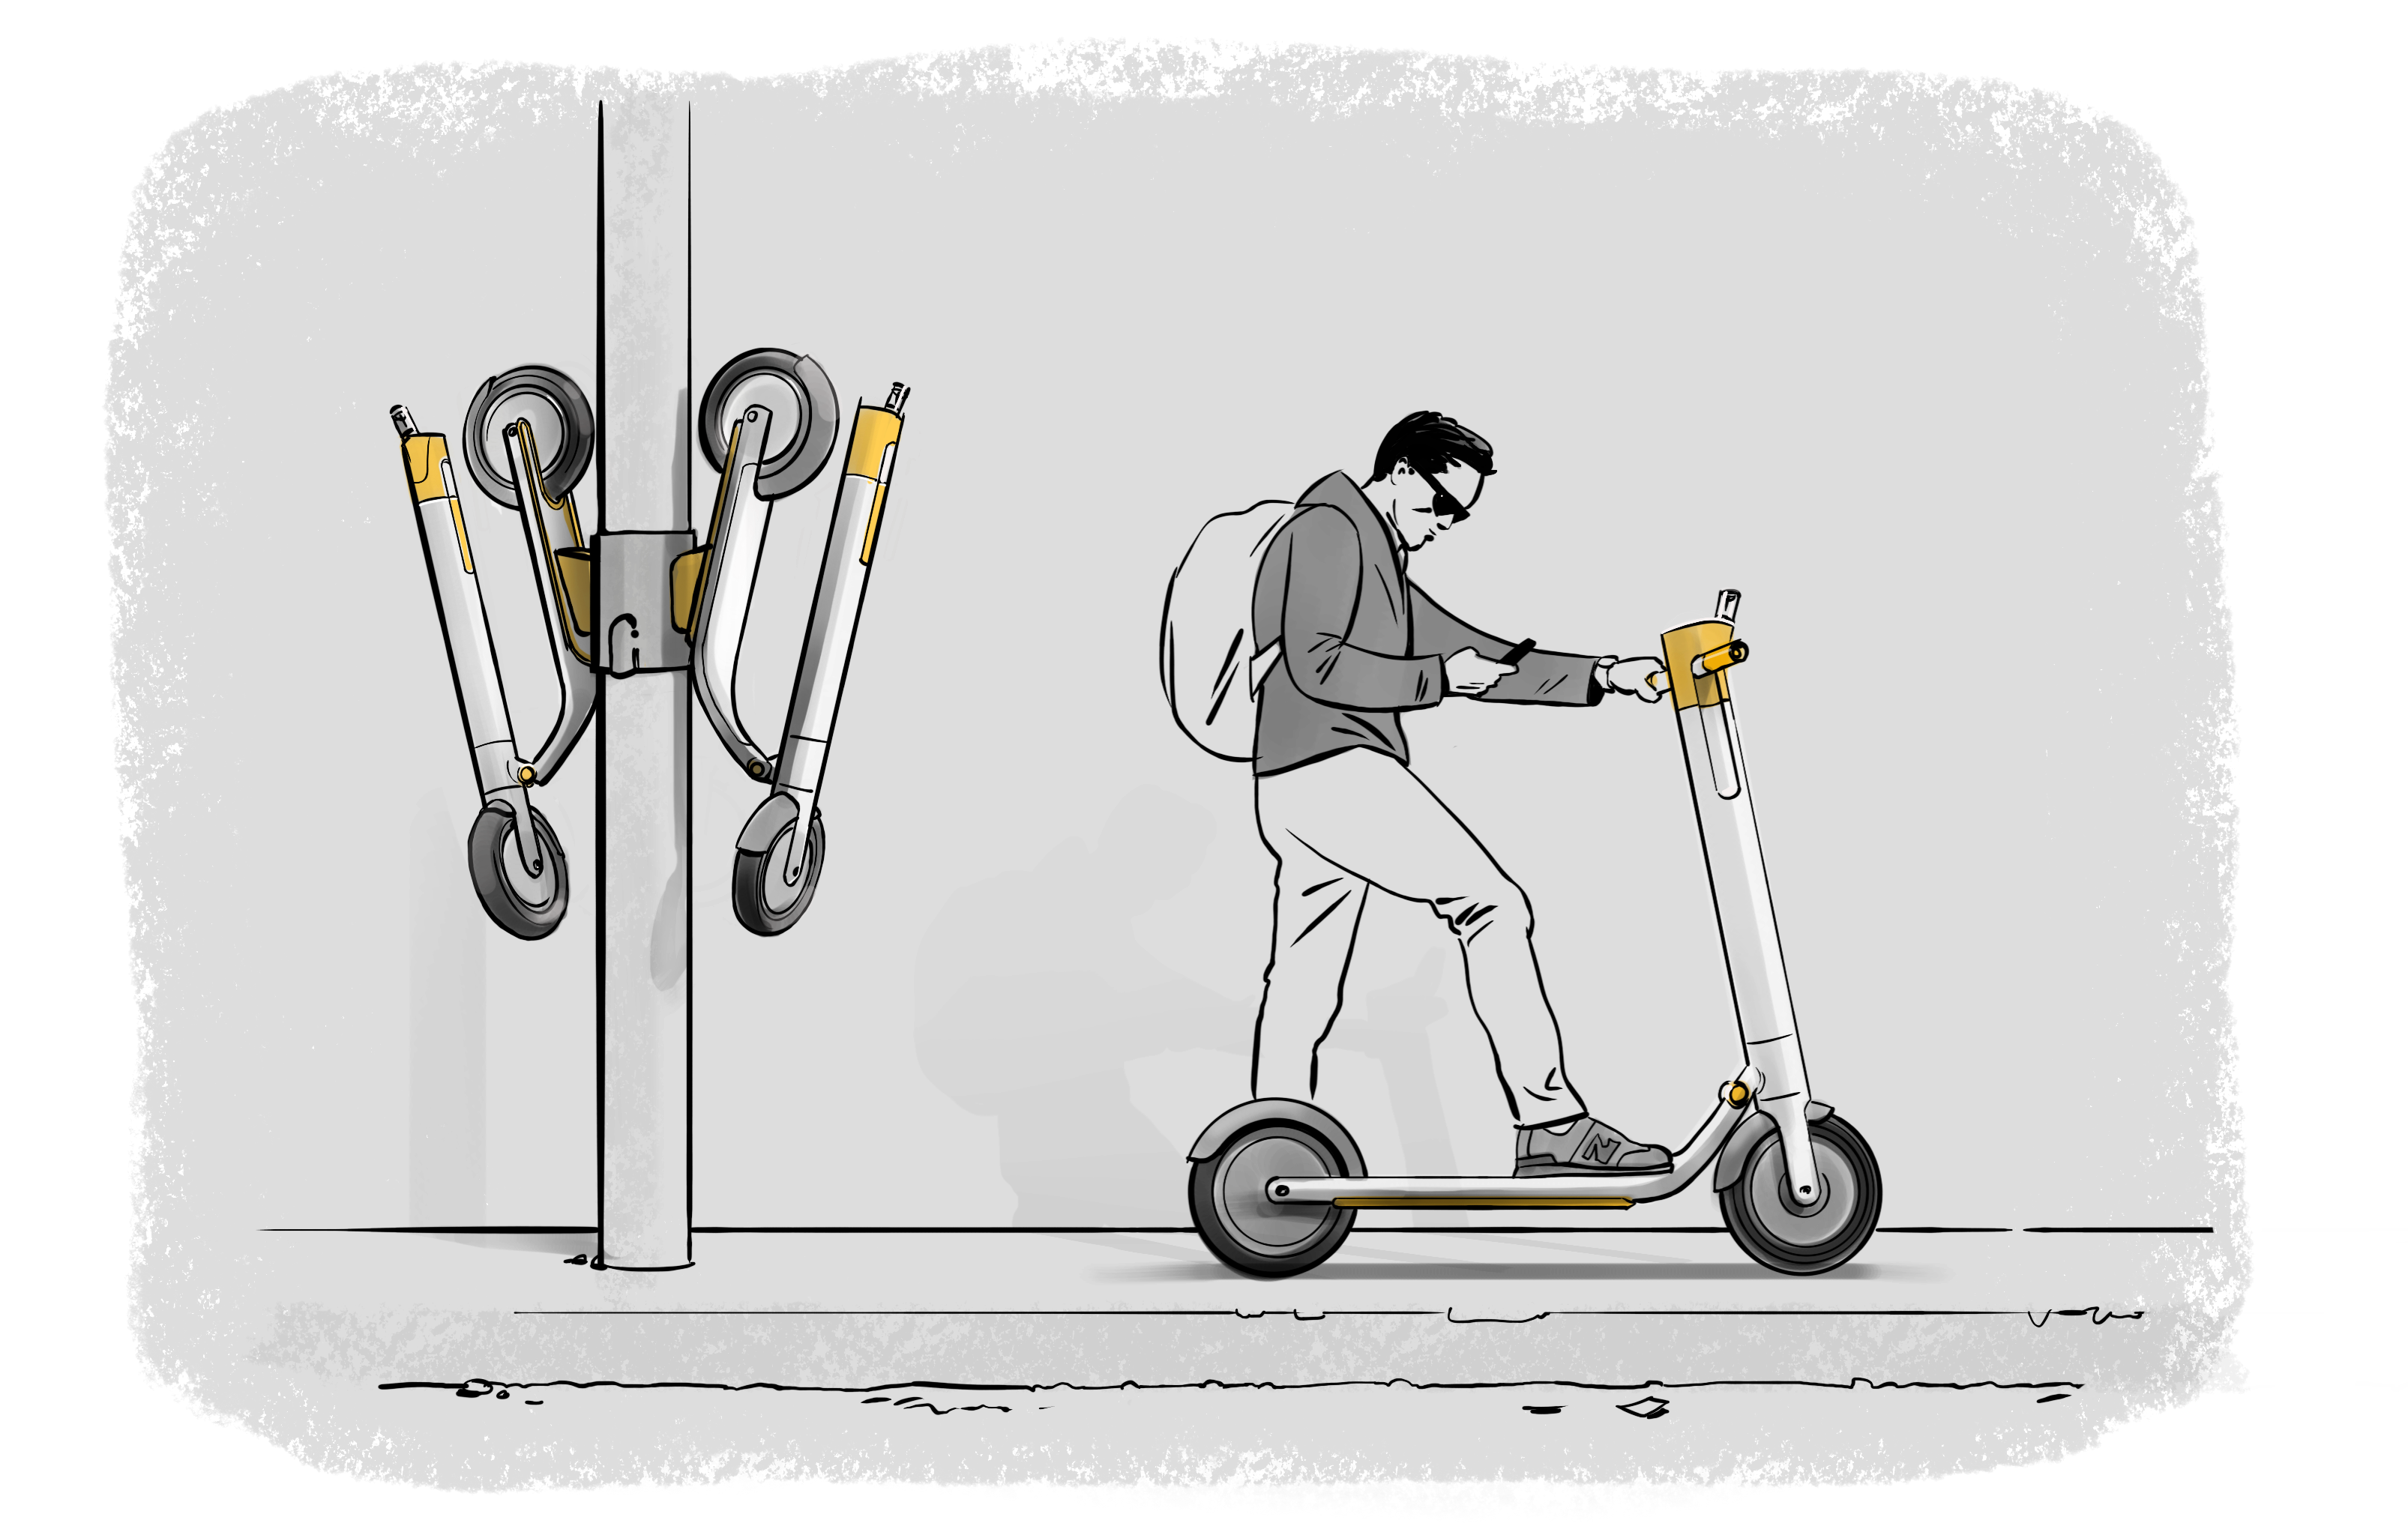 Illustration of light pole with fold-up scooters attached next to a man getting on a scooter